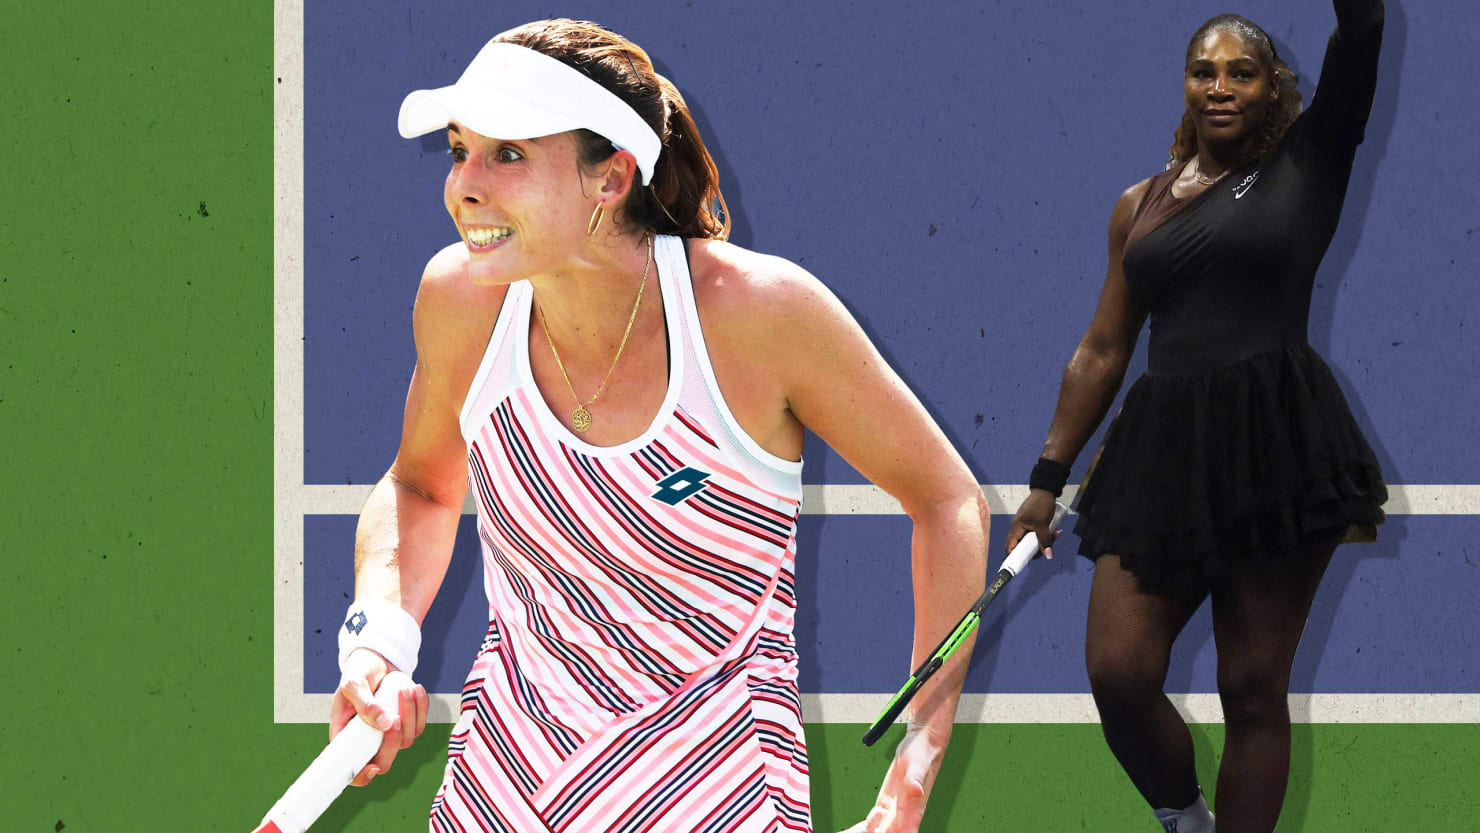 This female tennis player was penalized for removing her shirt